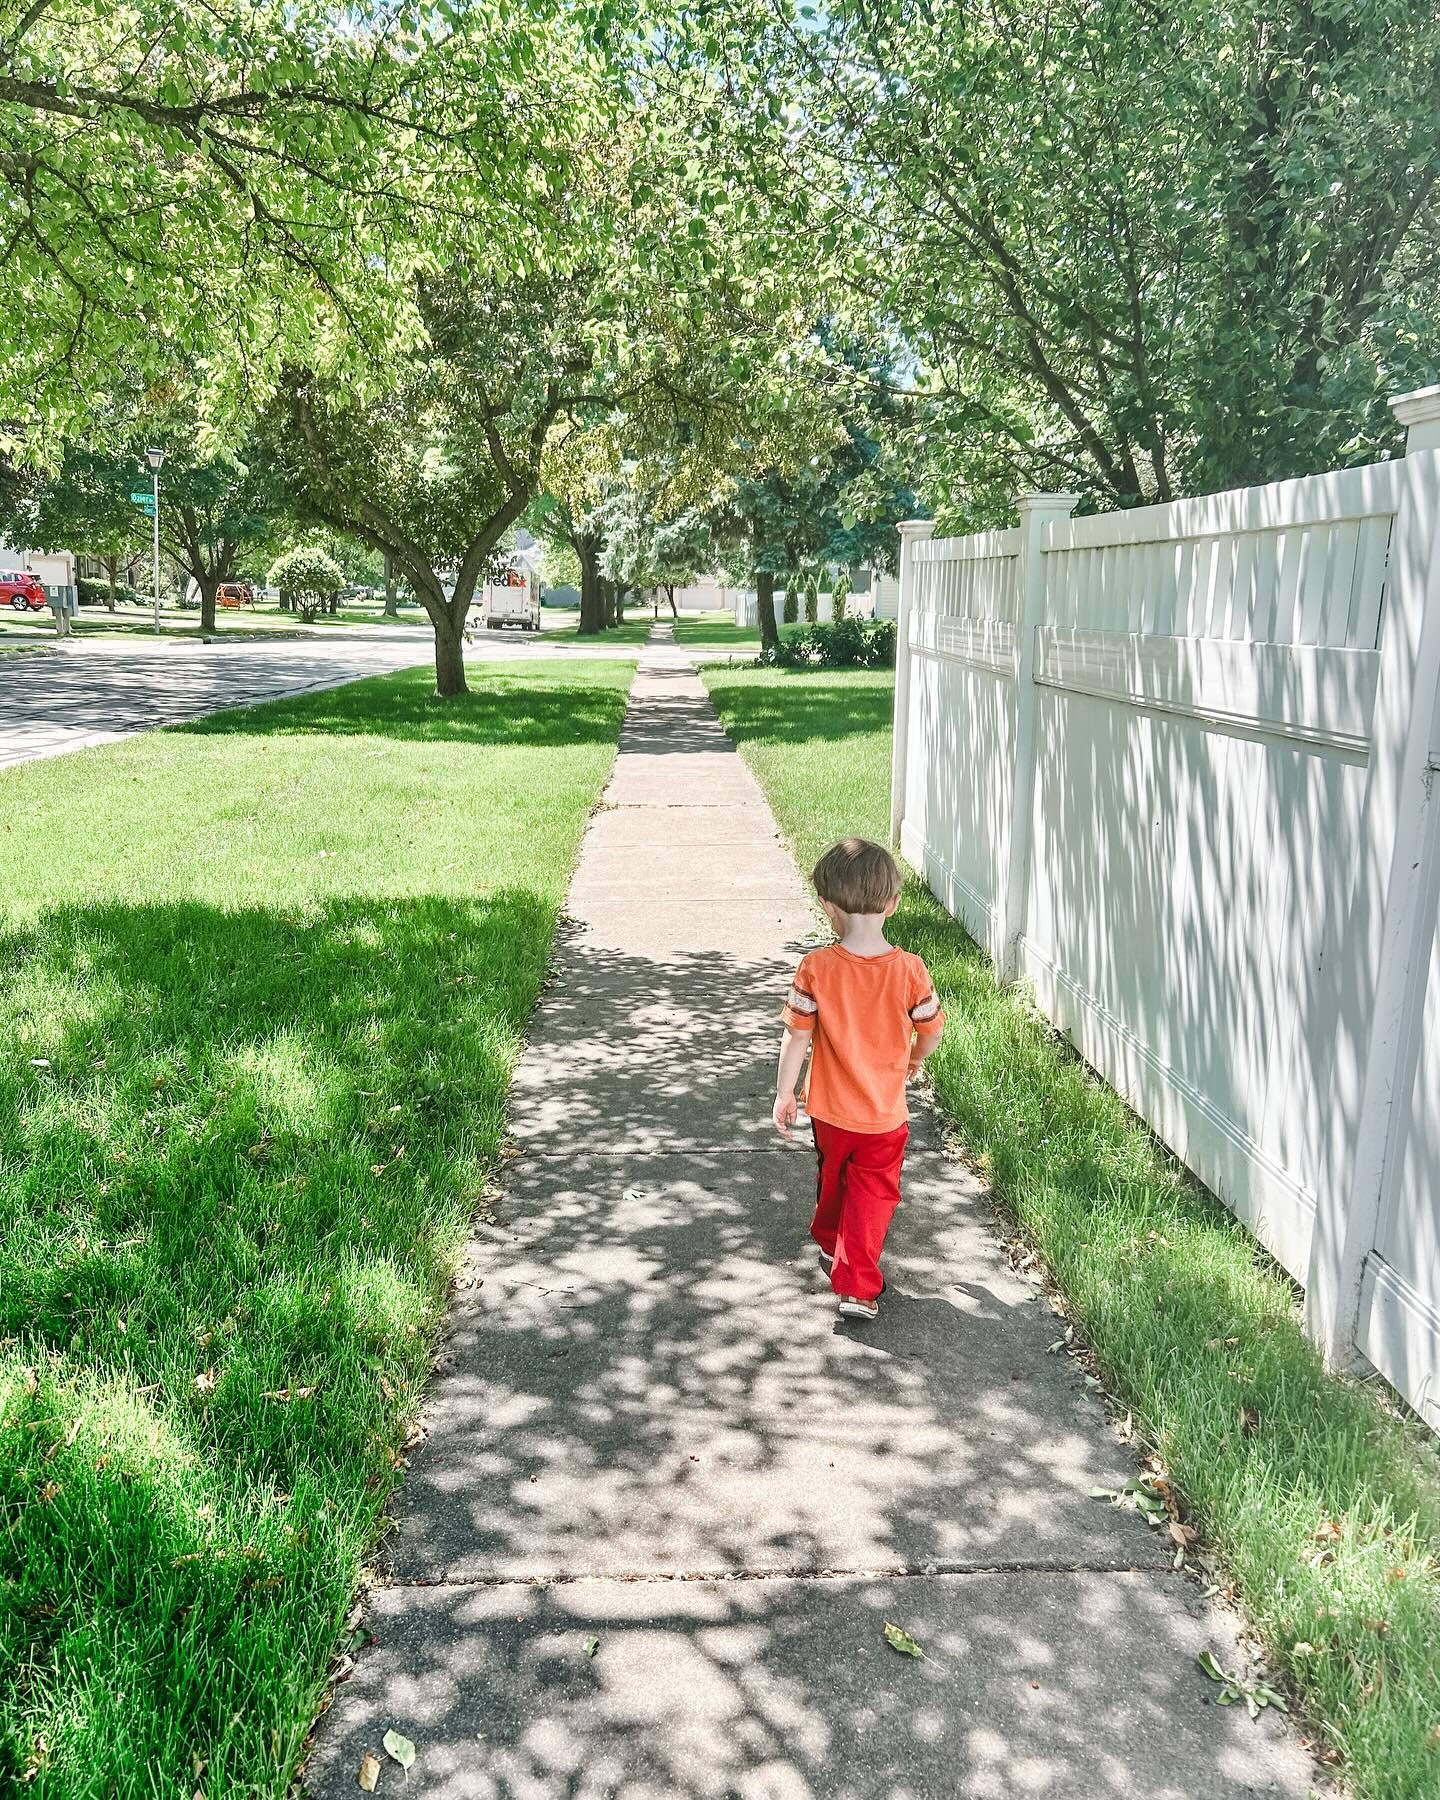 One of his favorite activities is to go for walks. He doesn&rsquo;t want to ride in the stroller. He wants to jump over the cracks in the sidewalk, squat down to look at a rock, run through the grass to pick a dandelion.

Sometimes, I don&rsquo;t fee